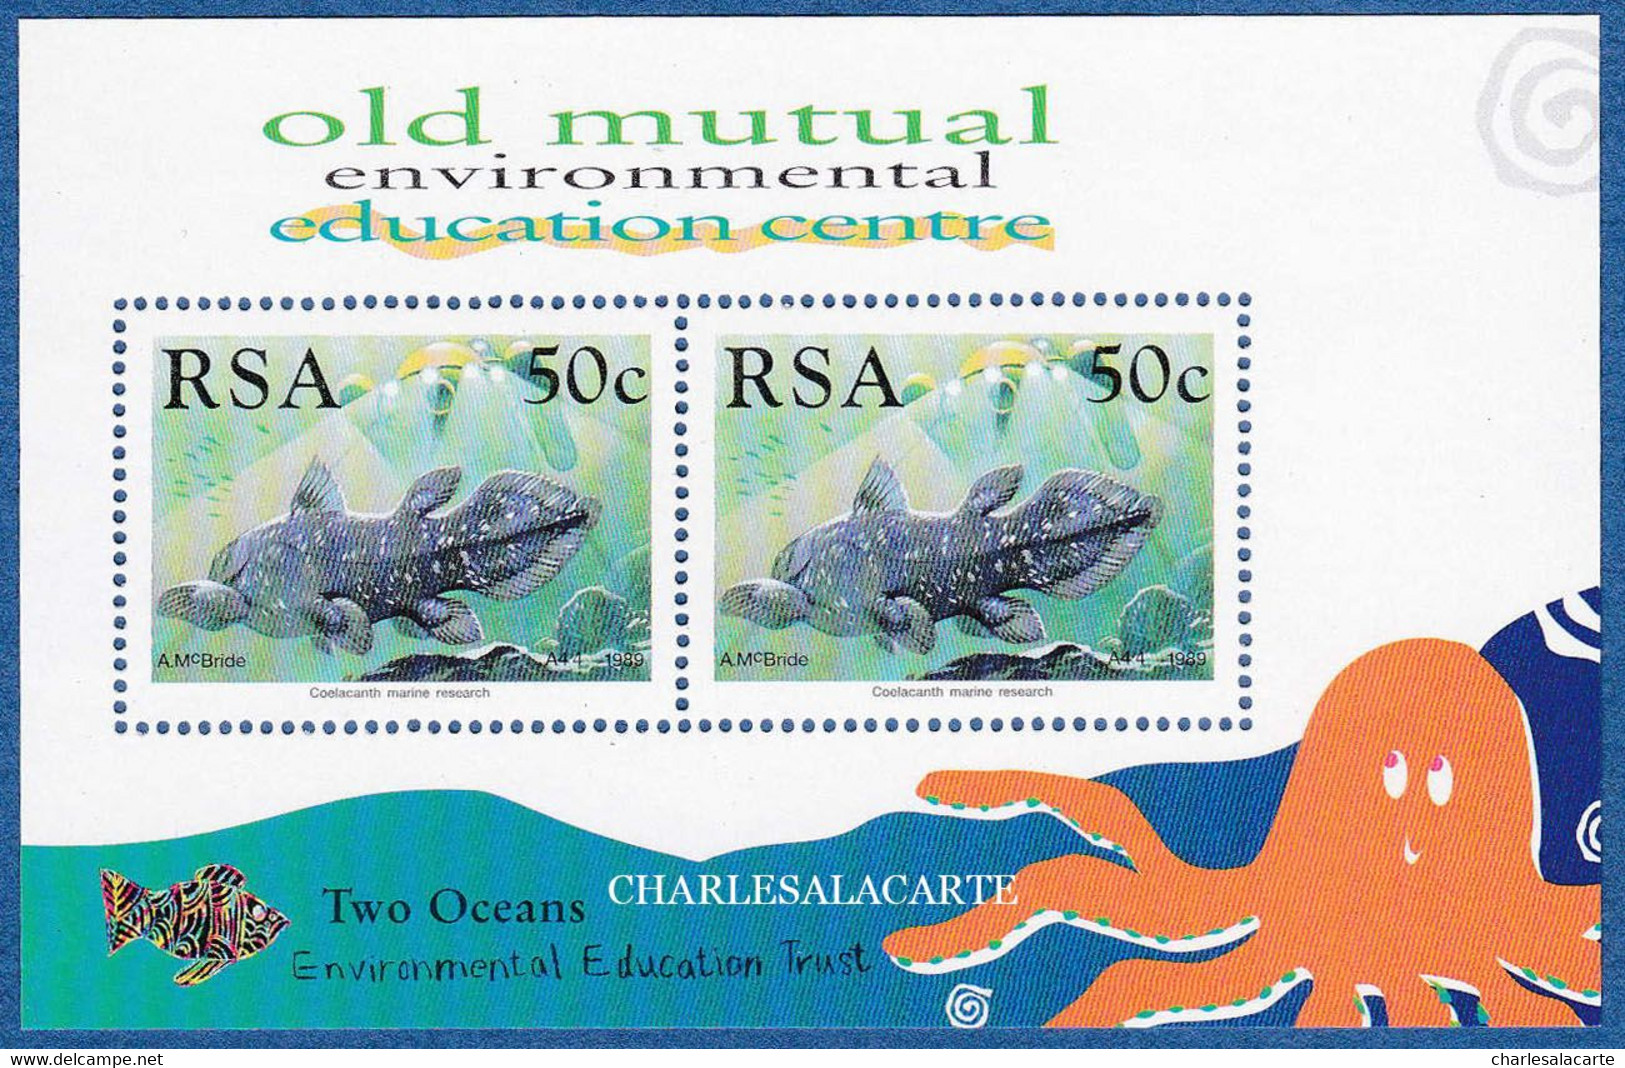 SOUTH AFRICA  1989  COELACANTH DISCOVERY M.S. OLD MUTUEL  S.G. 680 (2) M.S.  U.M. - Blocs-feuillets